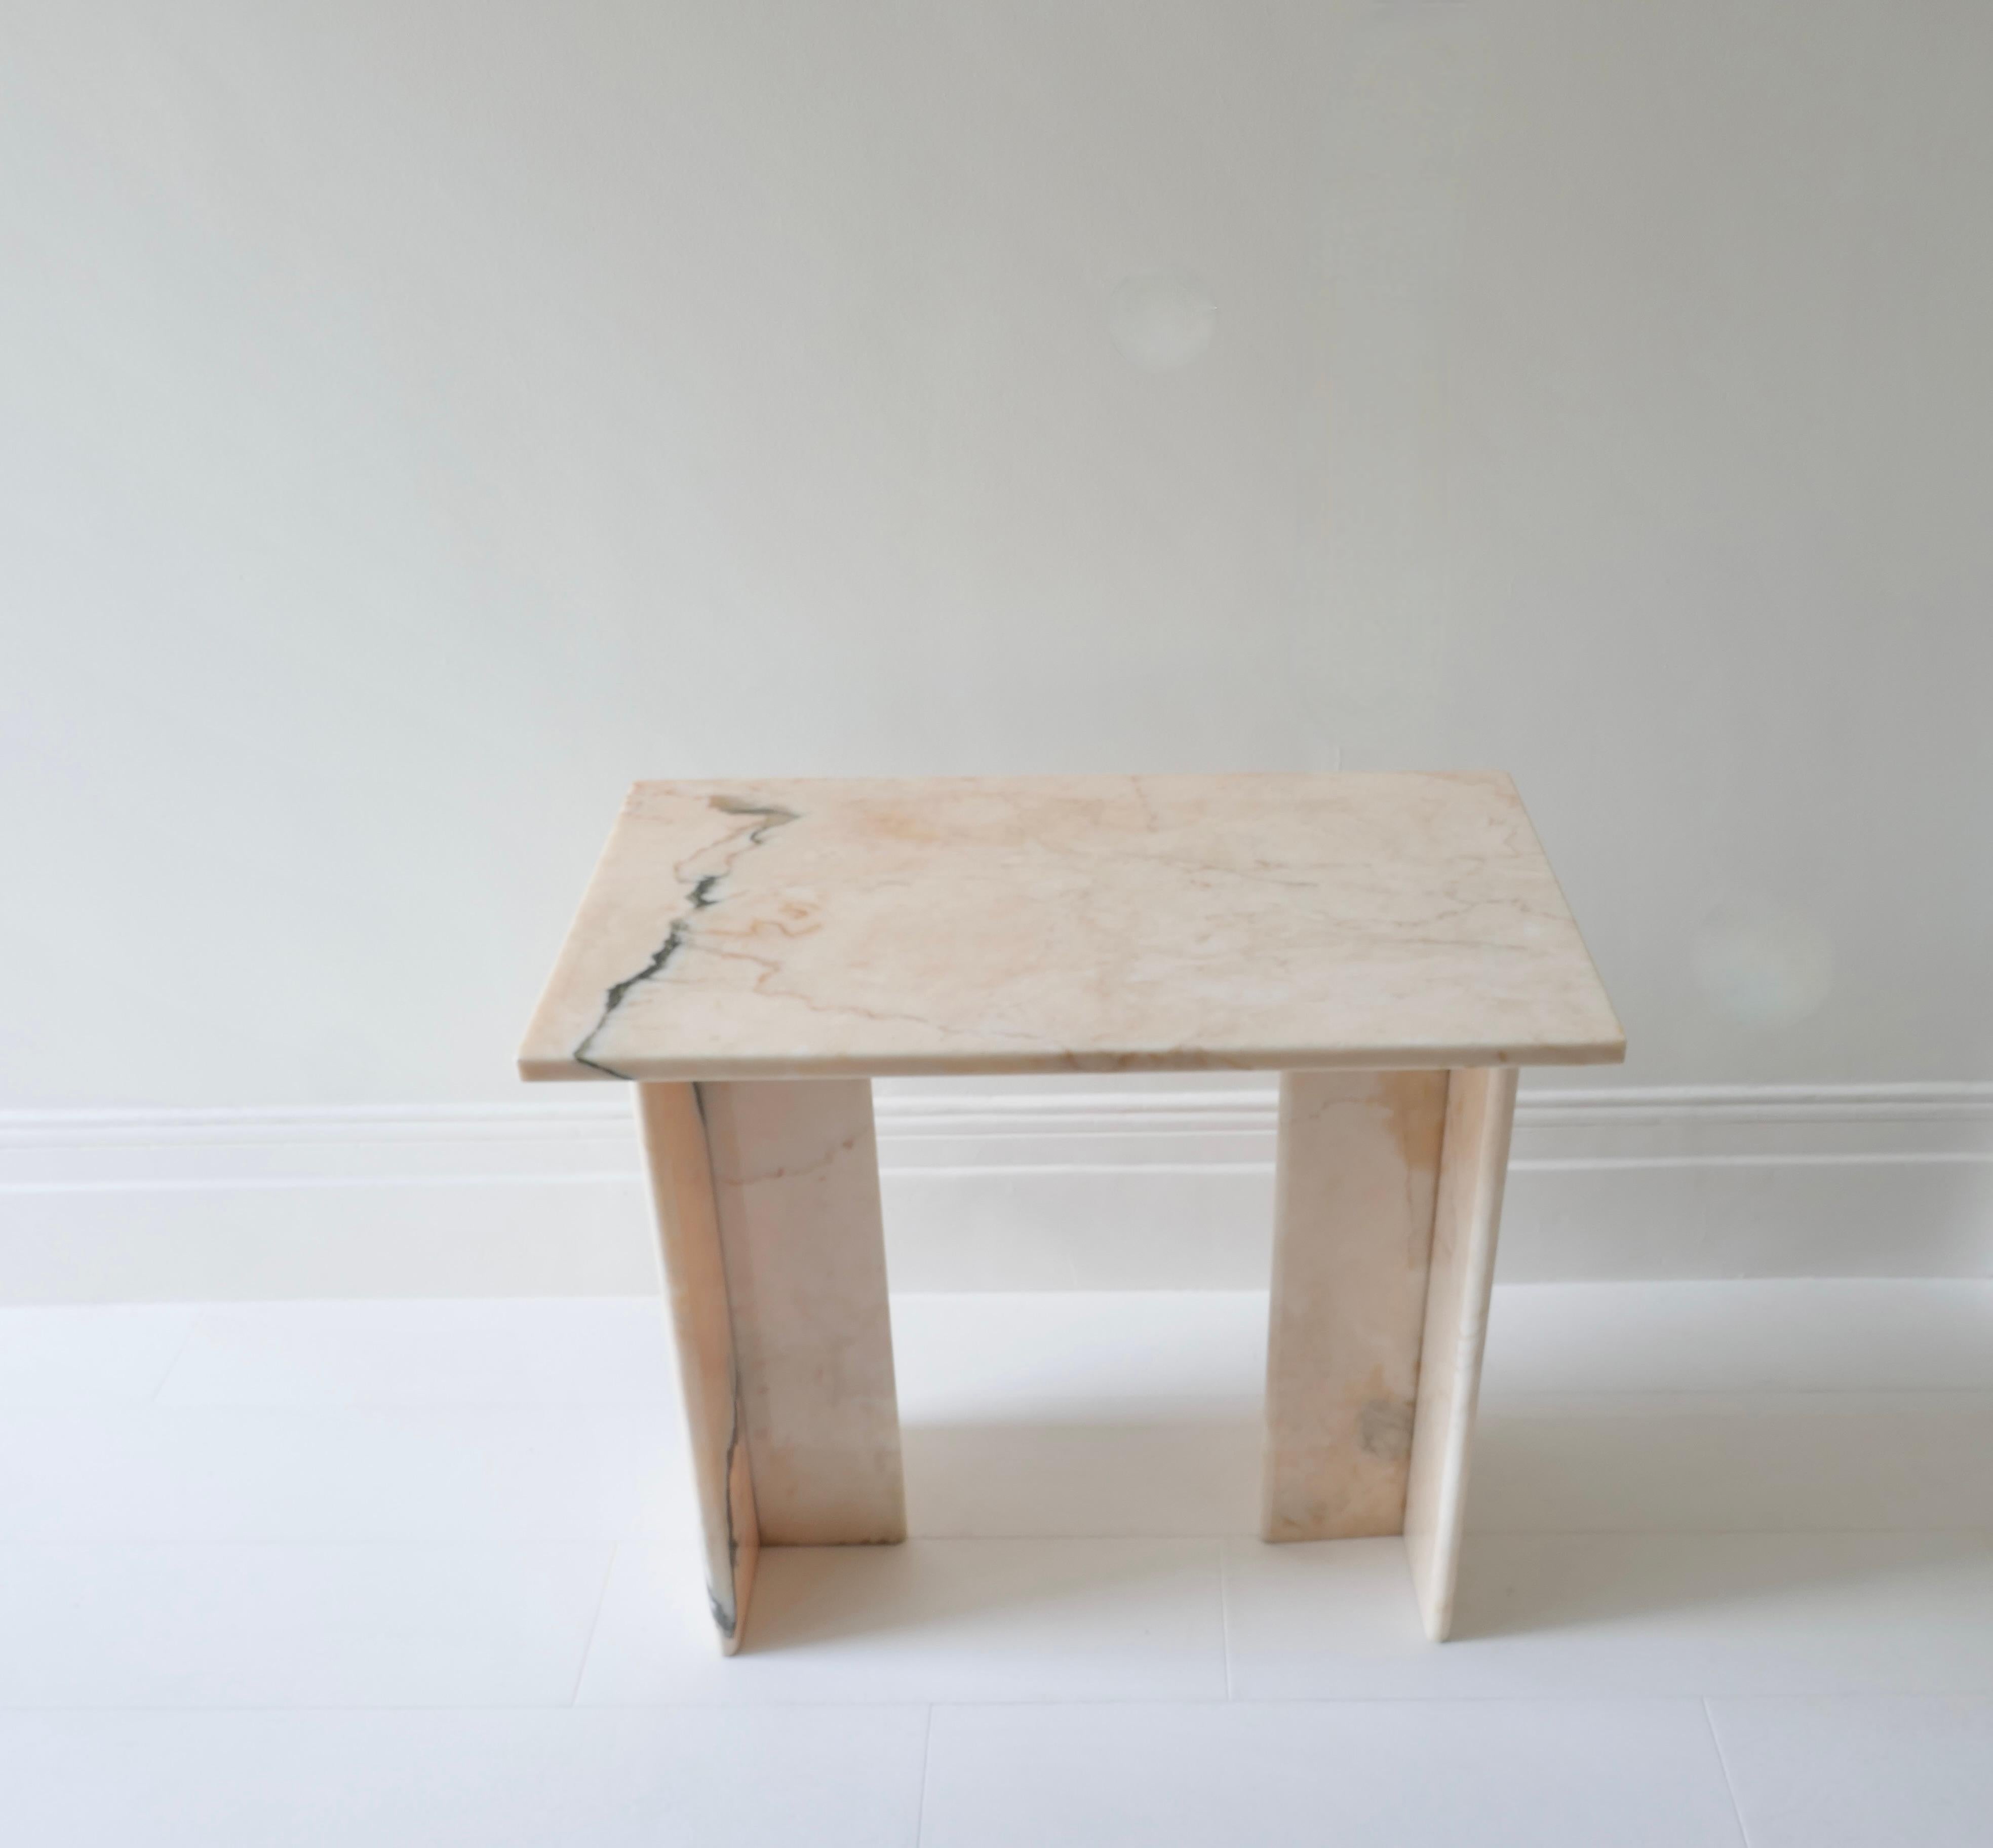 An original small table in Pink Portuguese marble with black veins.
Its unique size makes it adaptable to many uses : as a small console, a small desk or a vanity table. 
A delicate pink colour with black veins adding character and substance.
Top